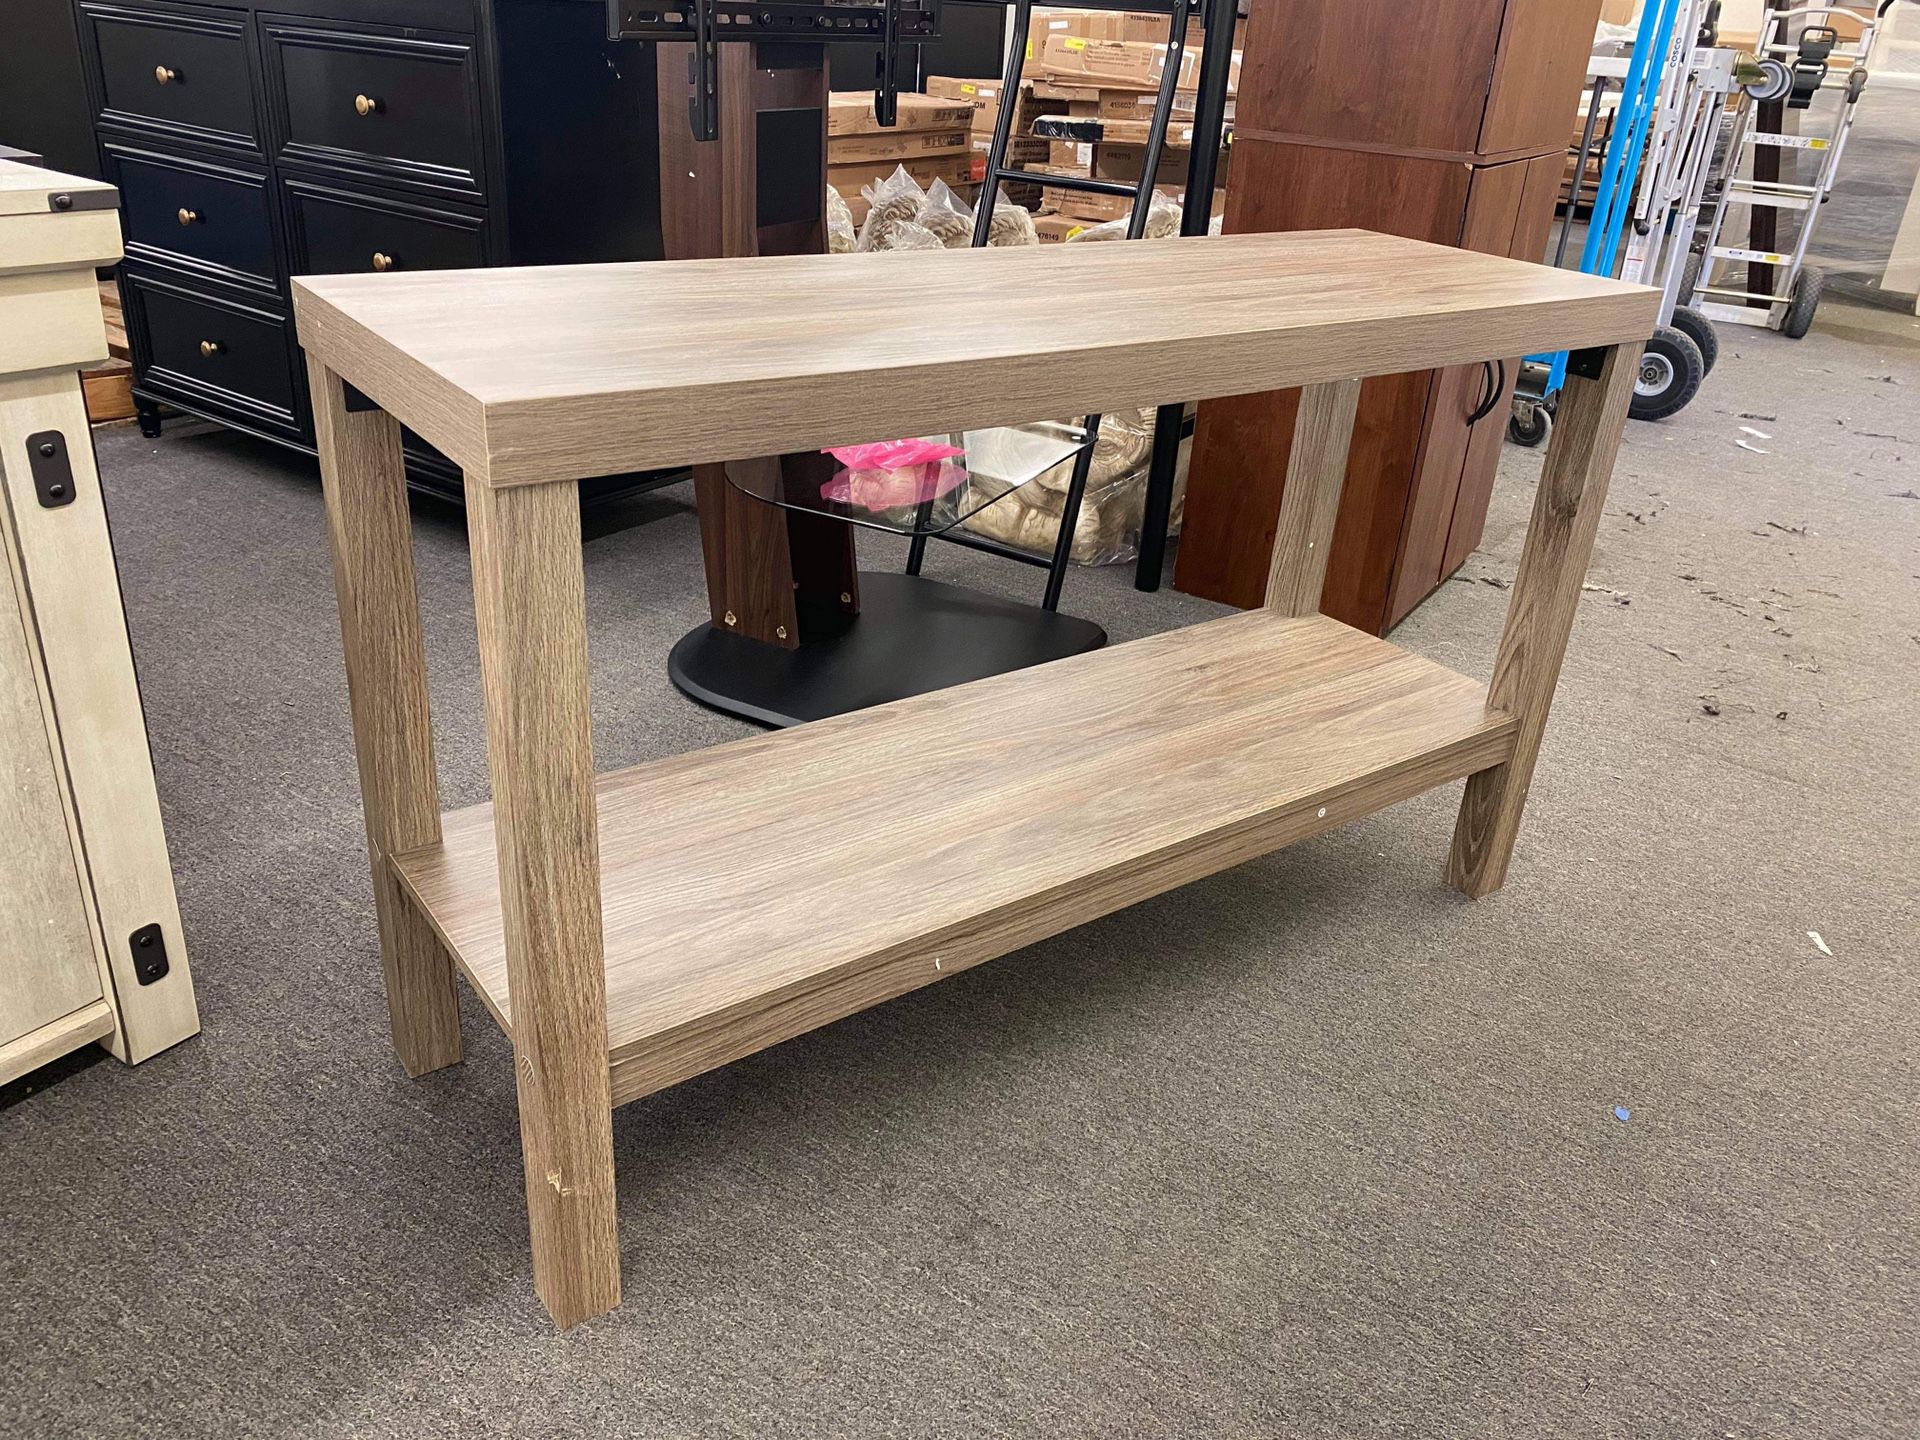 Scratch and Dent Rustic Oak Parson Console Table, Sofa Table or Entryway Table (AS-IS, Already Assembled) Retails Over $100 Our Price $59 TM*